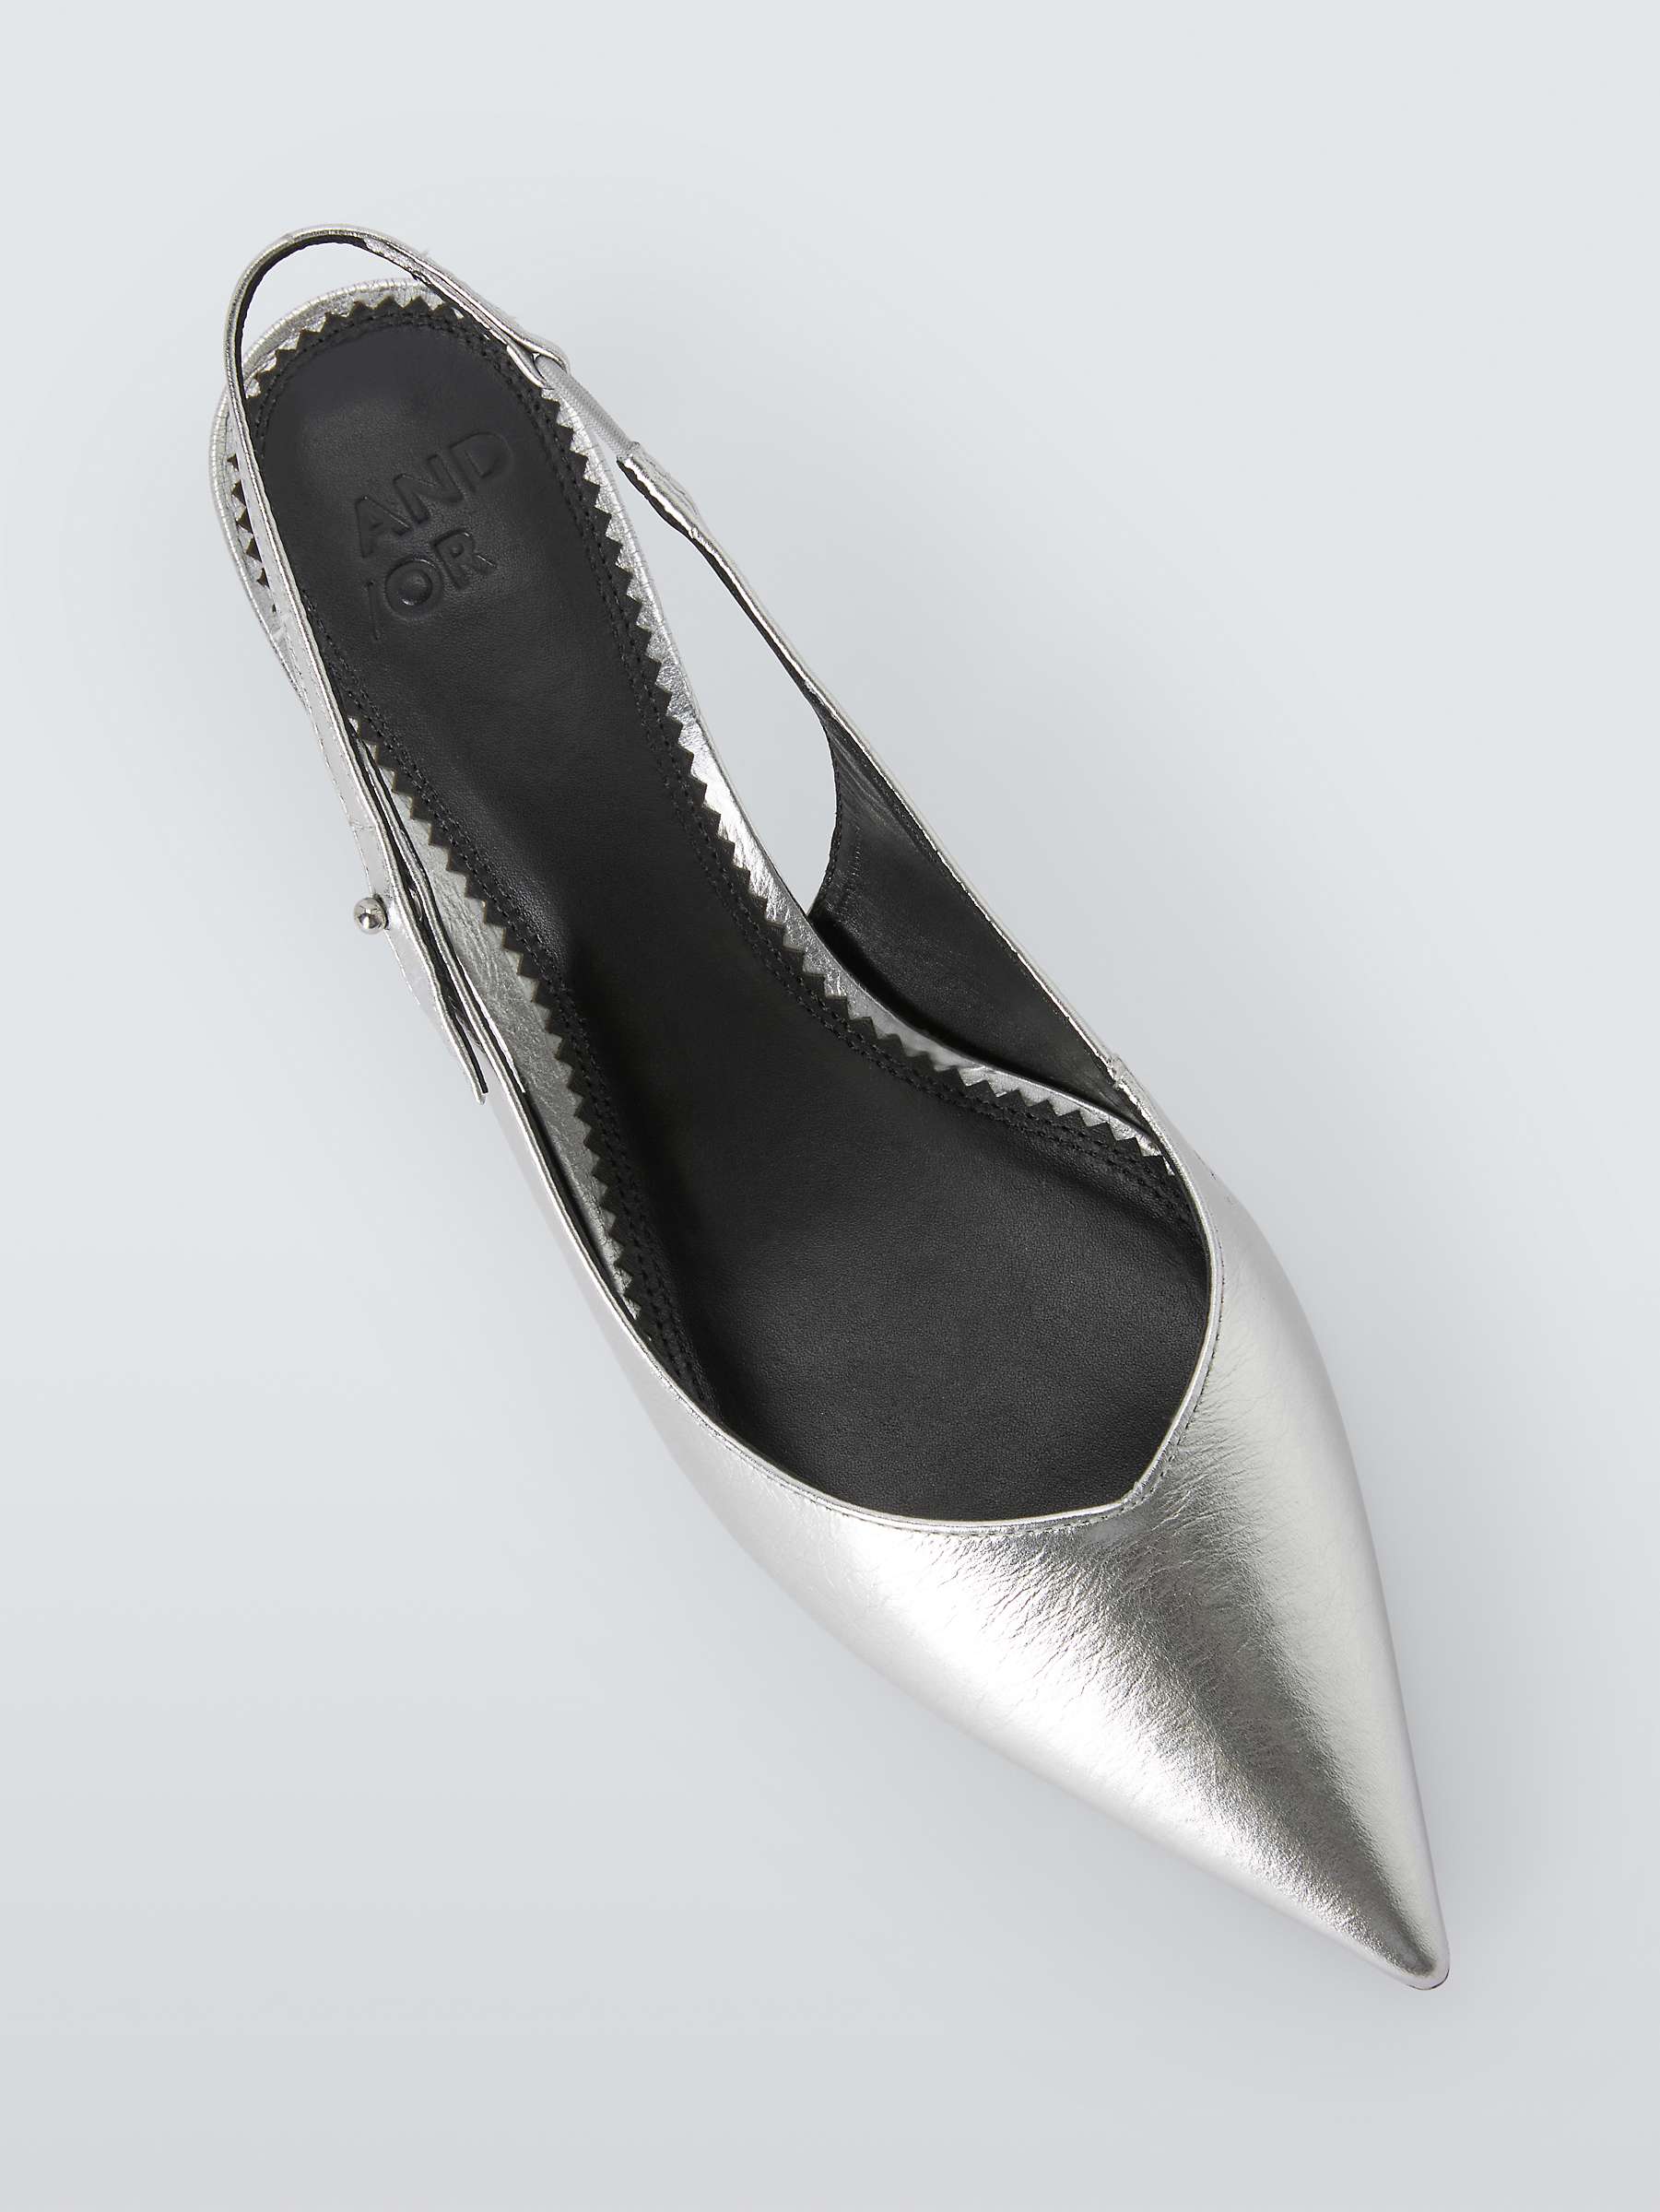 Buy AND/OR Dahlea Leather Sweetheart Topline Slingback Court Shoes, Silver Online at johnlewis.com